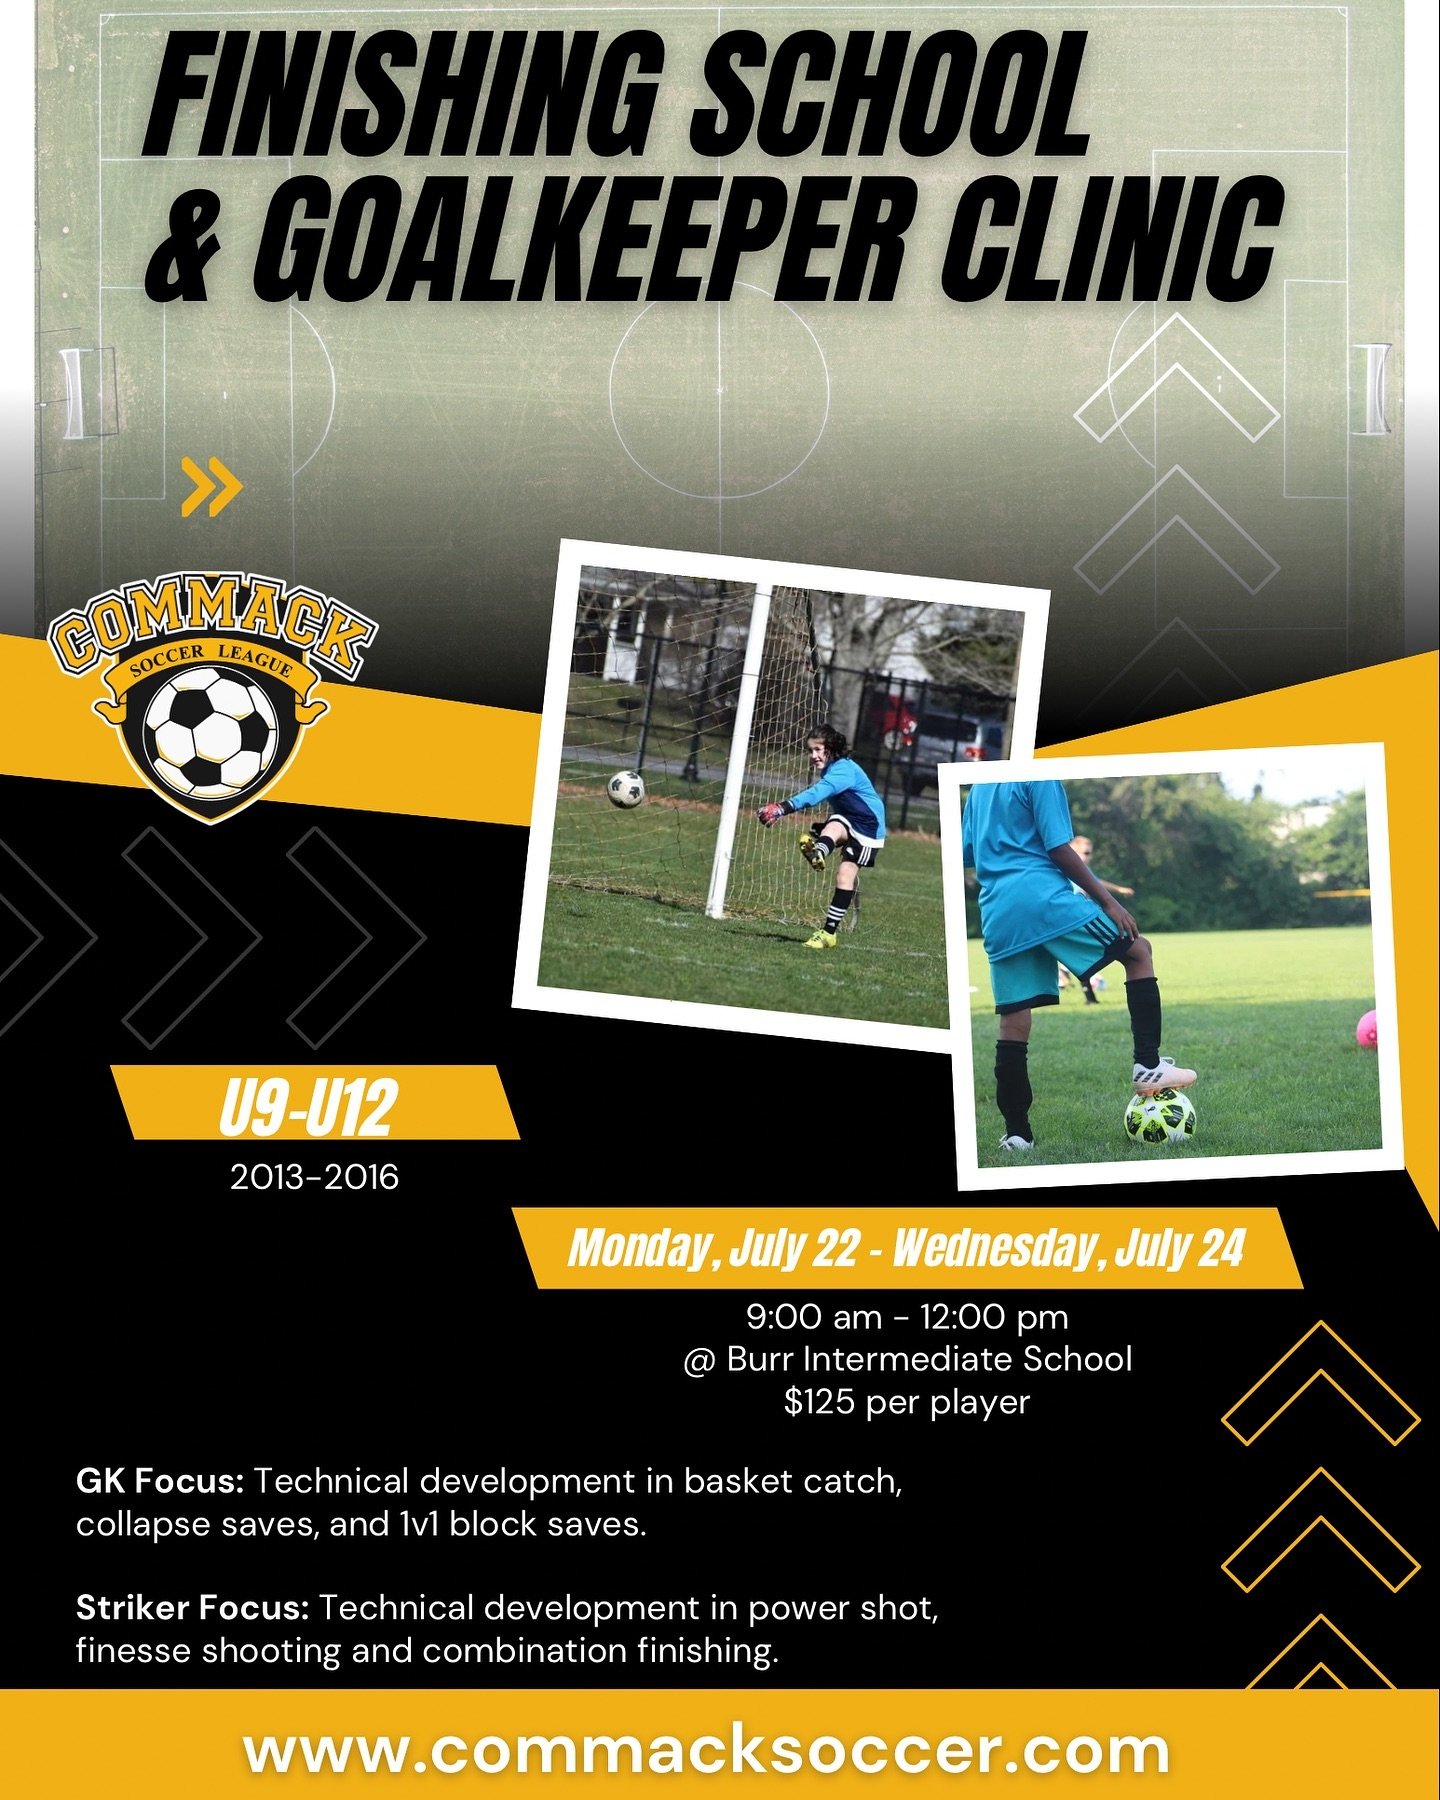 We will be hosting a U9-U12 Finishing School &amp; Goalkeeper Clinic this summer! The clinic will run from Monday, July 22 through Wednesday, July 24 from 9:00 am to 12:00 pm @ Burr Intermediate School. The cost is $125 per player and registration in